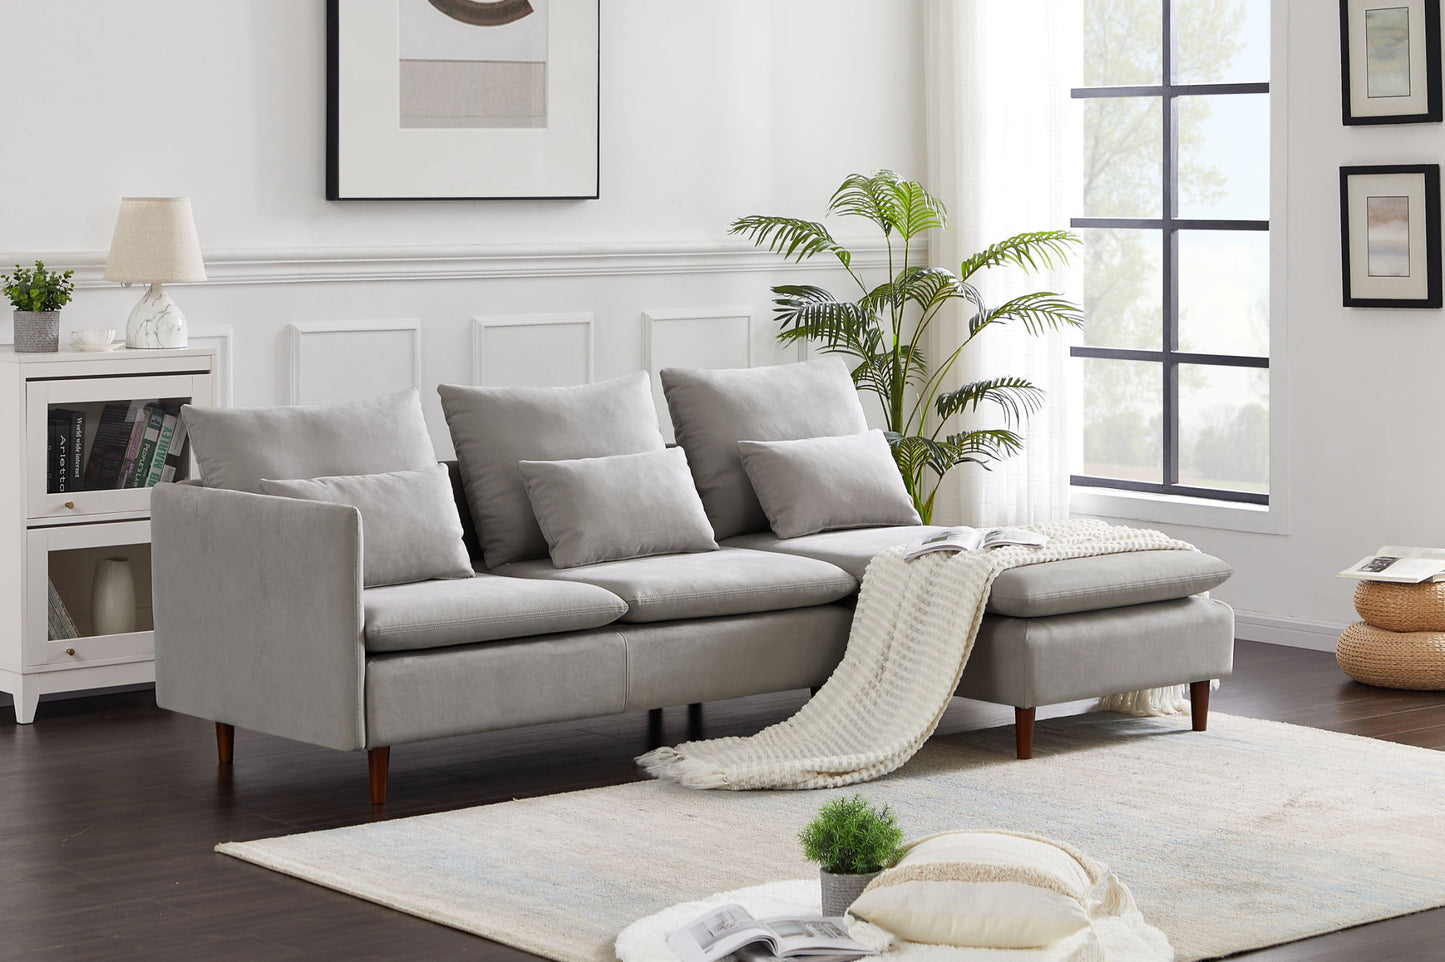 Morden Design Gray, Sofa with Chaise Lounge